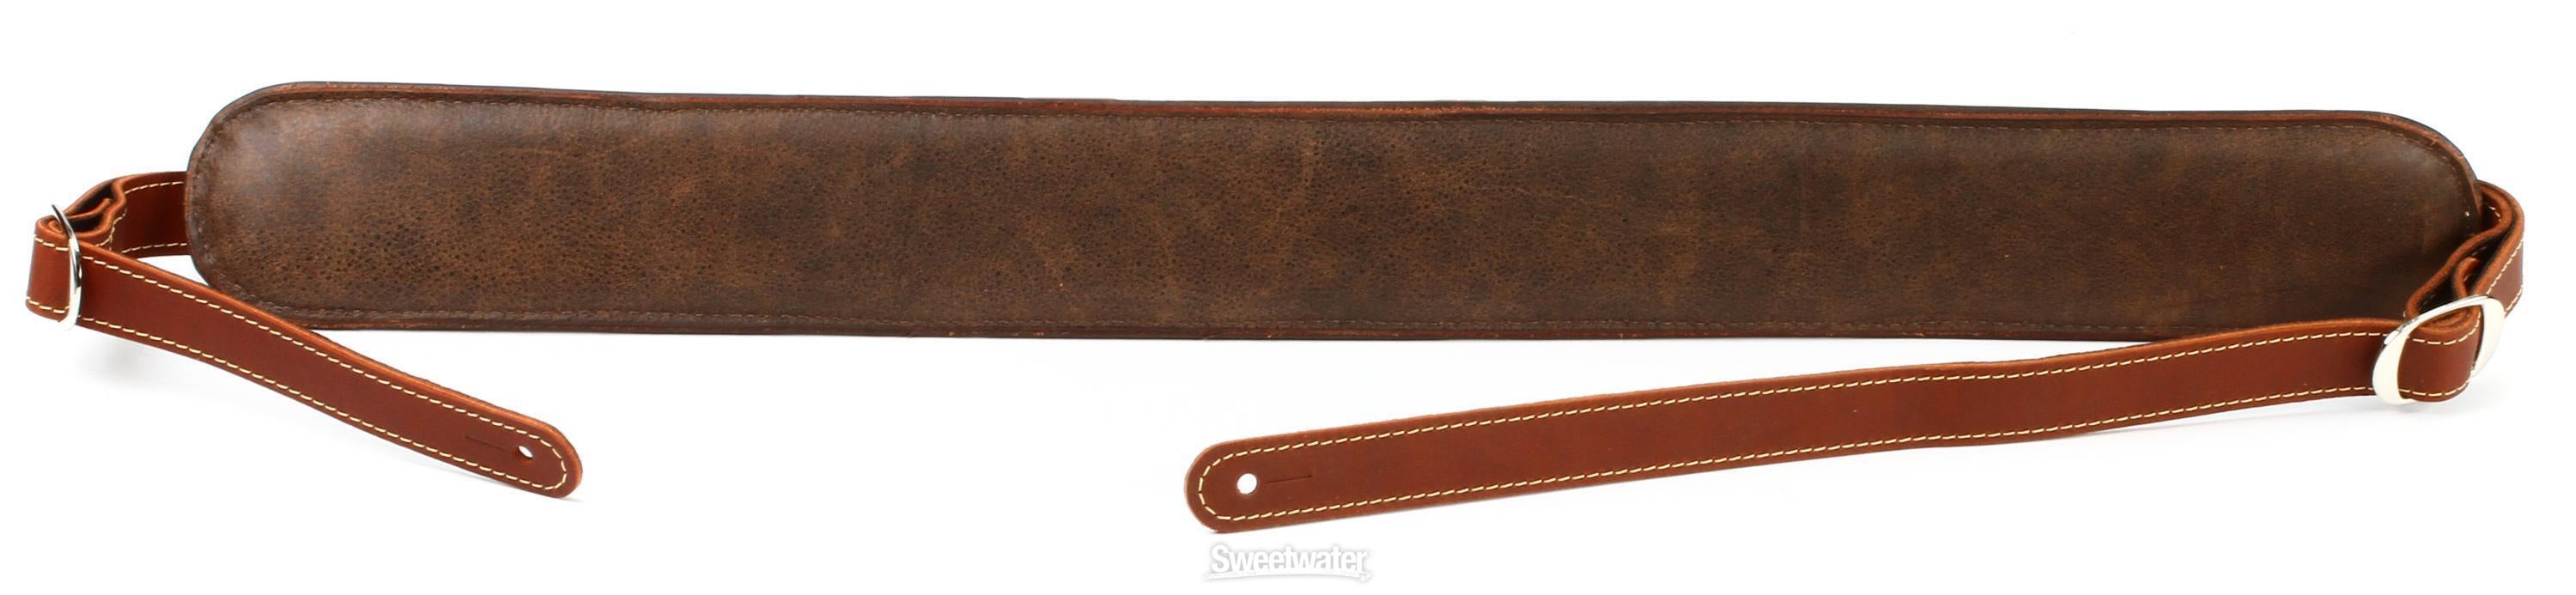 Gibson Accessories Austin Comfort Guitar Strap | Sweetwater